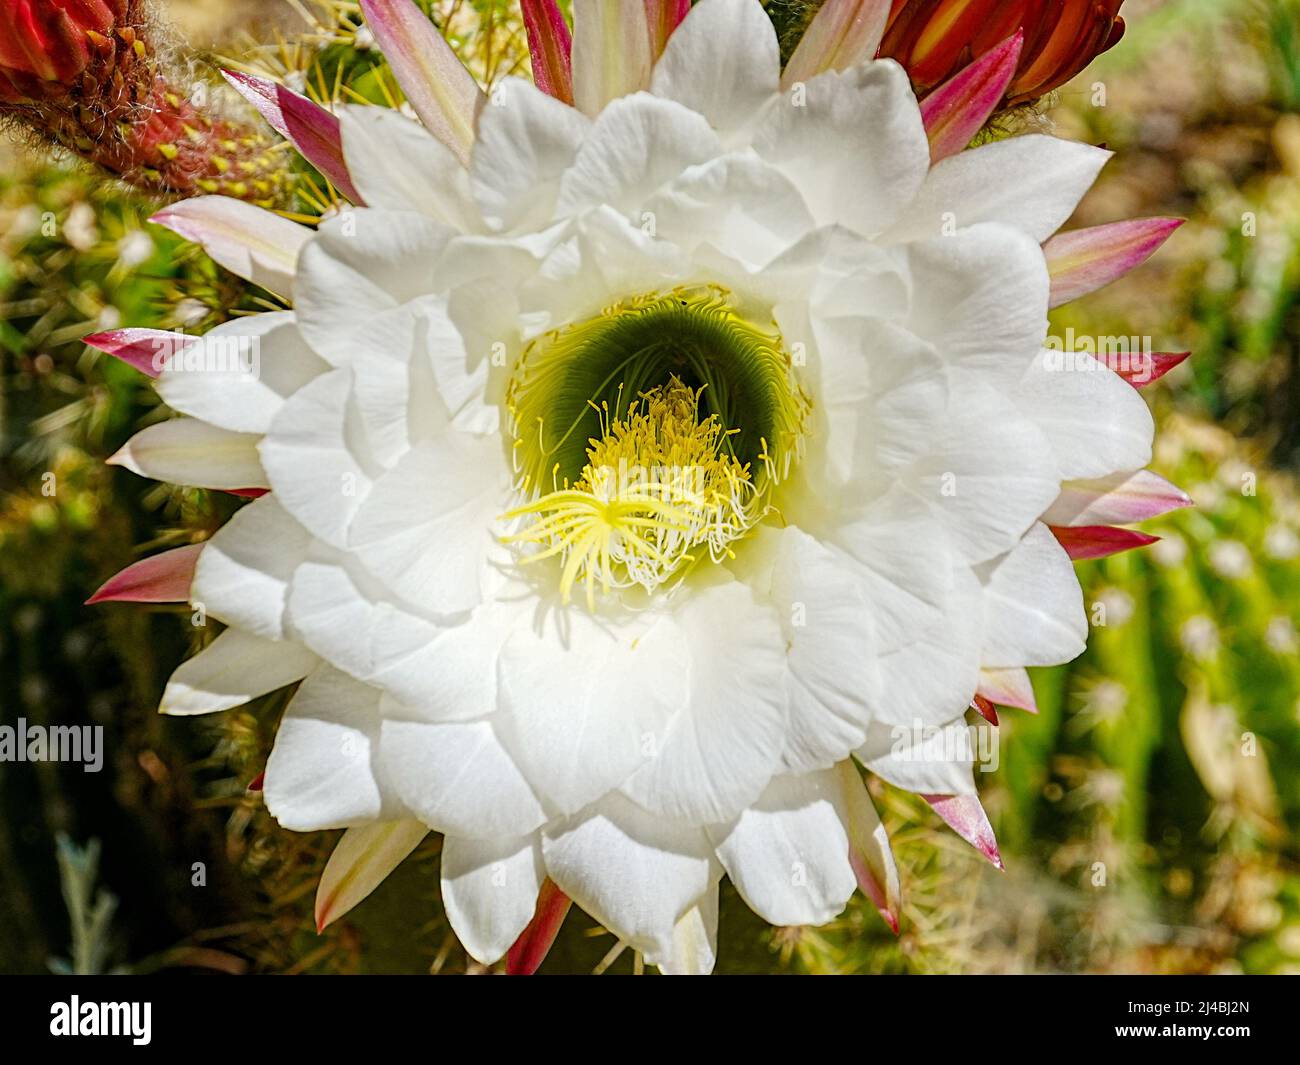 Echinopsis candicans, or Argentine Giant has a beautiful billowy white bloom making it one of the more impressive cactus flowers Stock Photo